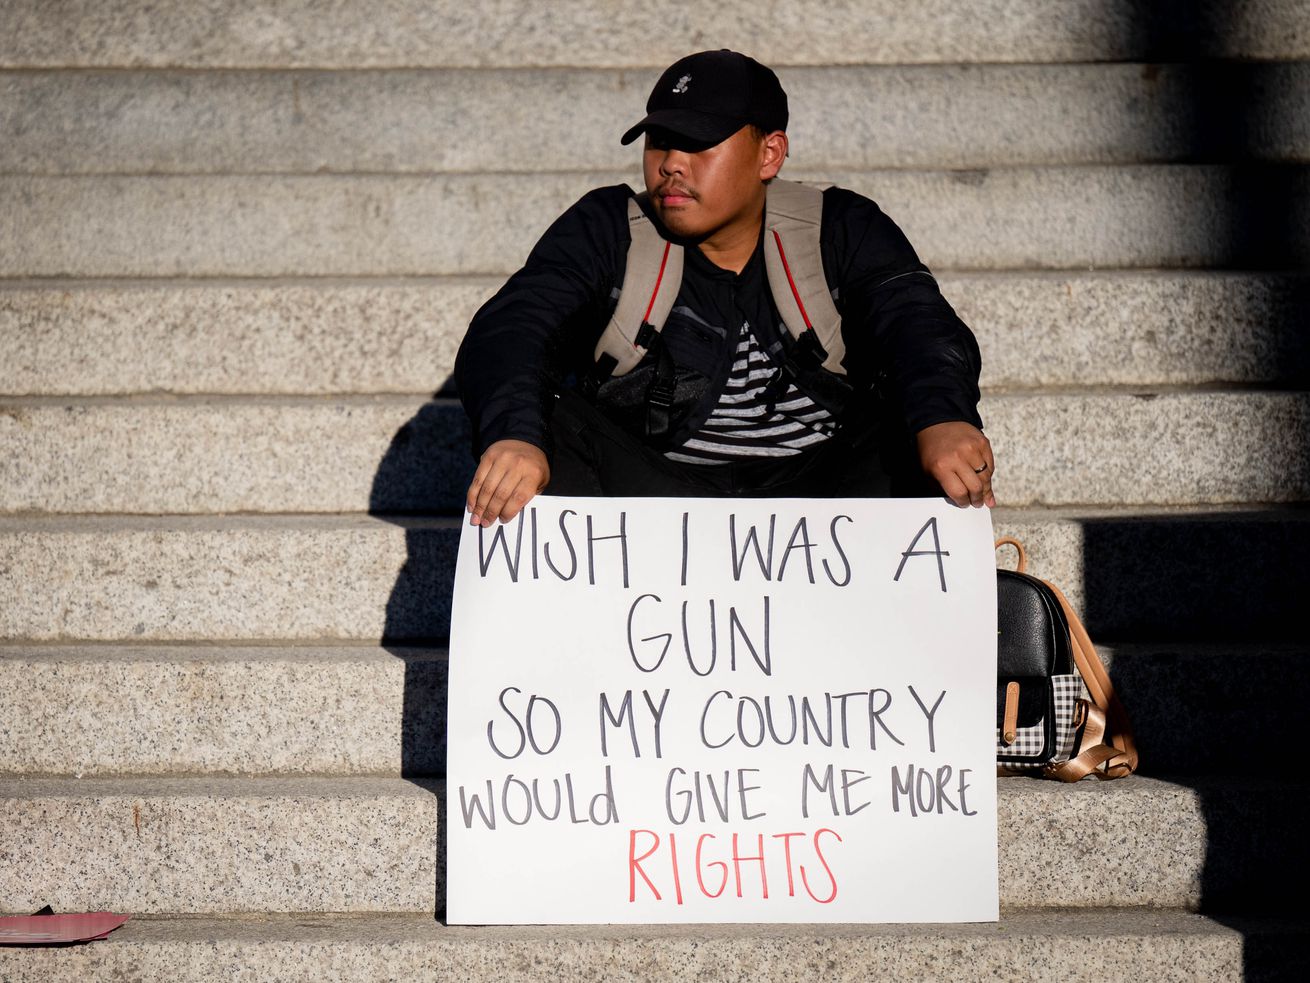 A man in a baseball cap sits on a flight of stairs with a sign propped on his knees reading “Wish I was a gun so my country would give me more rights.”